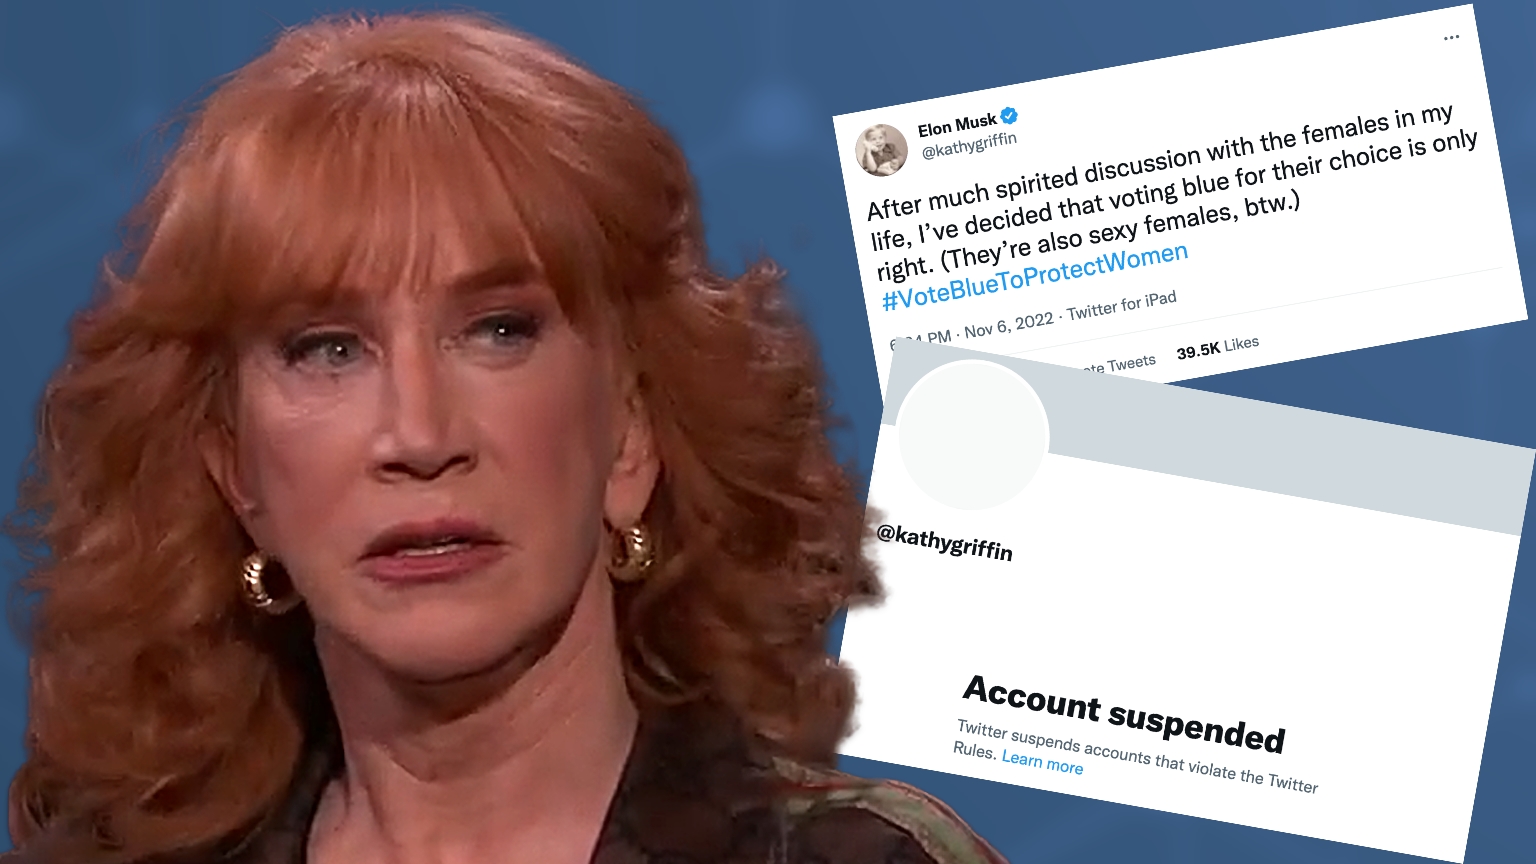 Twitter bans Kathy Griffin and others as it enforces rules against “impersonation”